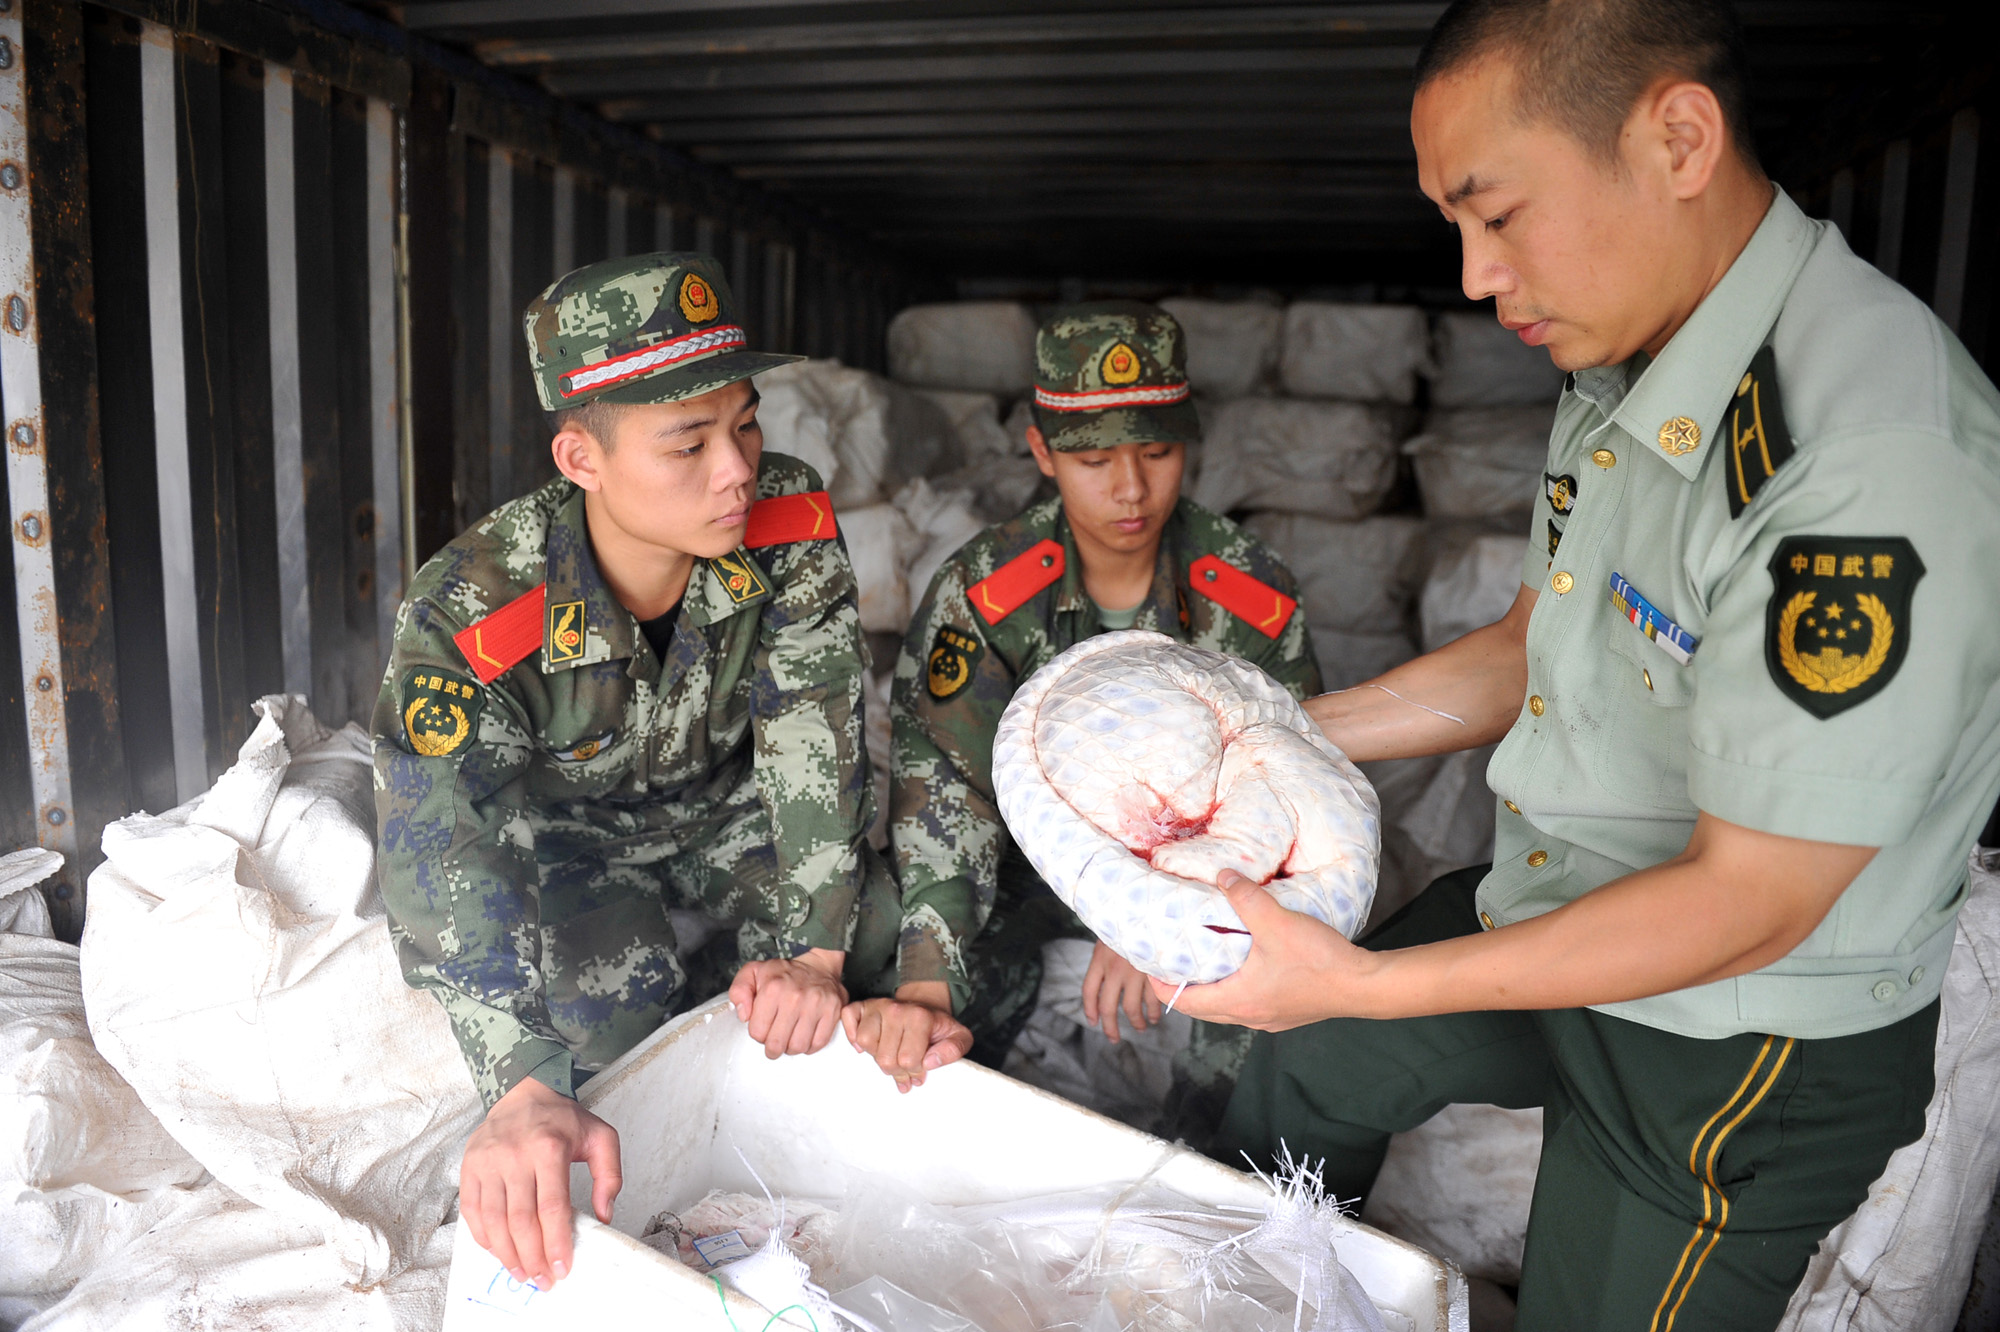 Chinese paramilitary policemen inspect pangolins seized for destruction at a plant in Zhuhai city, in southern China's Guangdong province, in May 2014 (Stringer—Imaginechina)